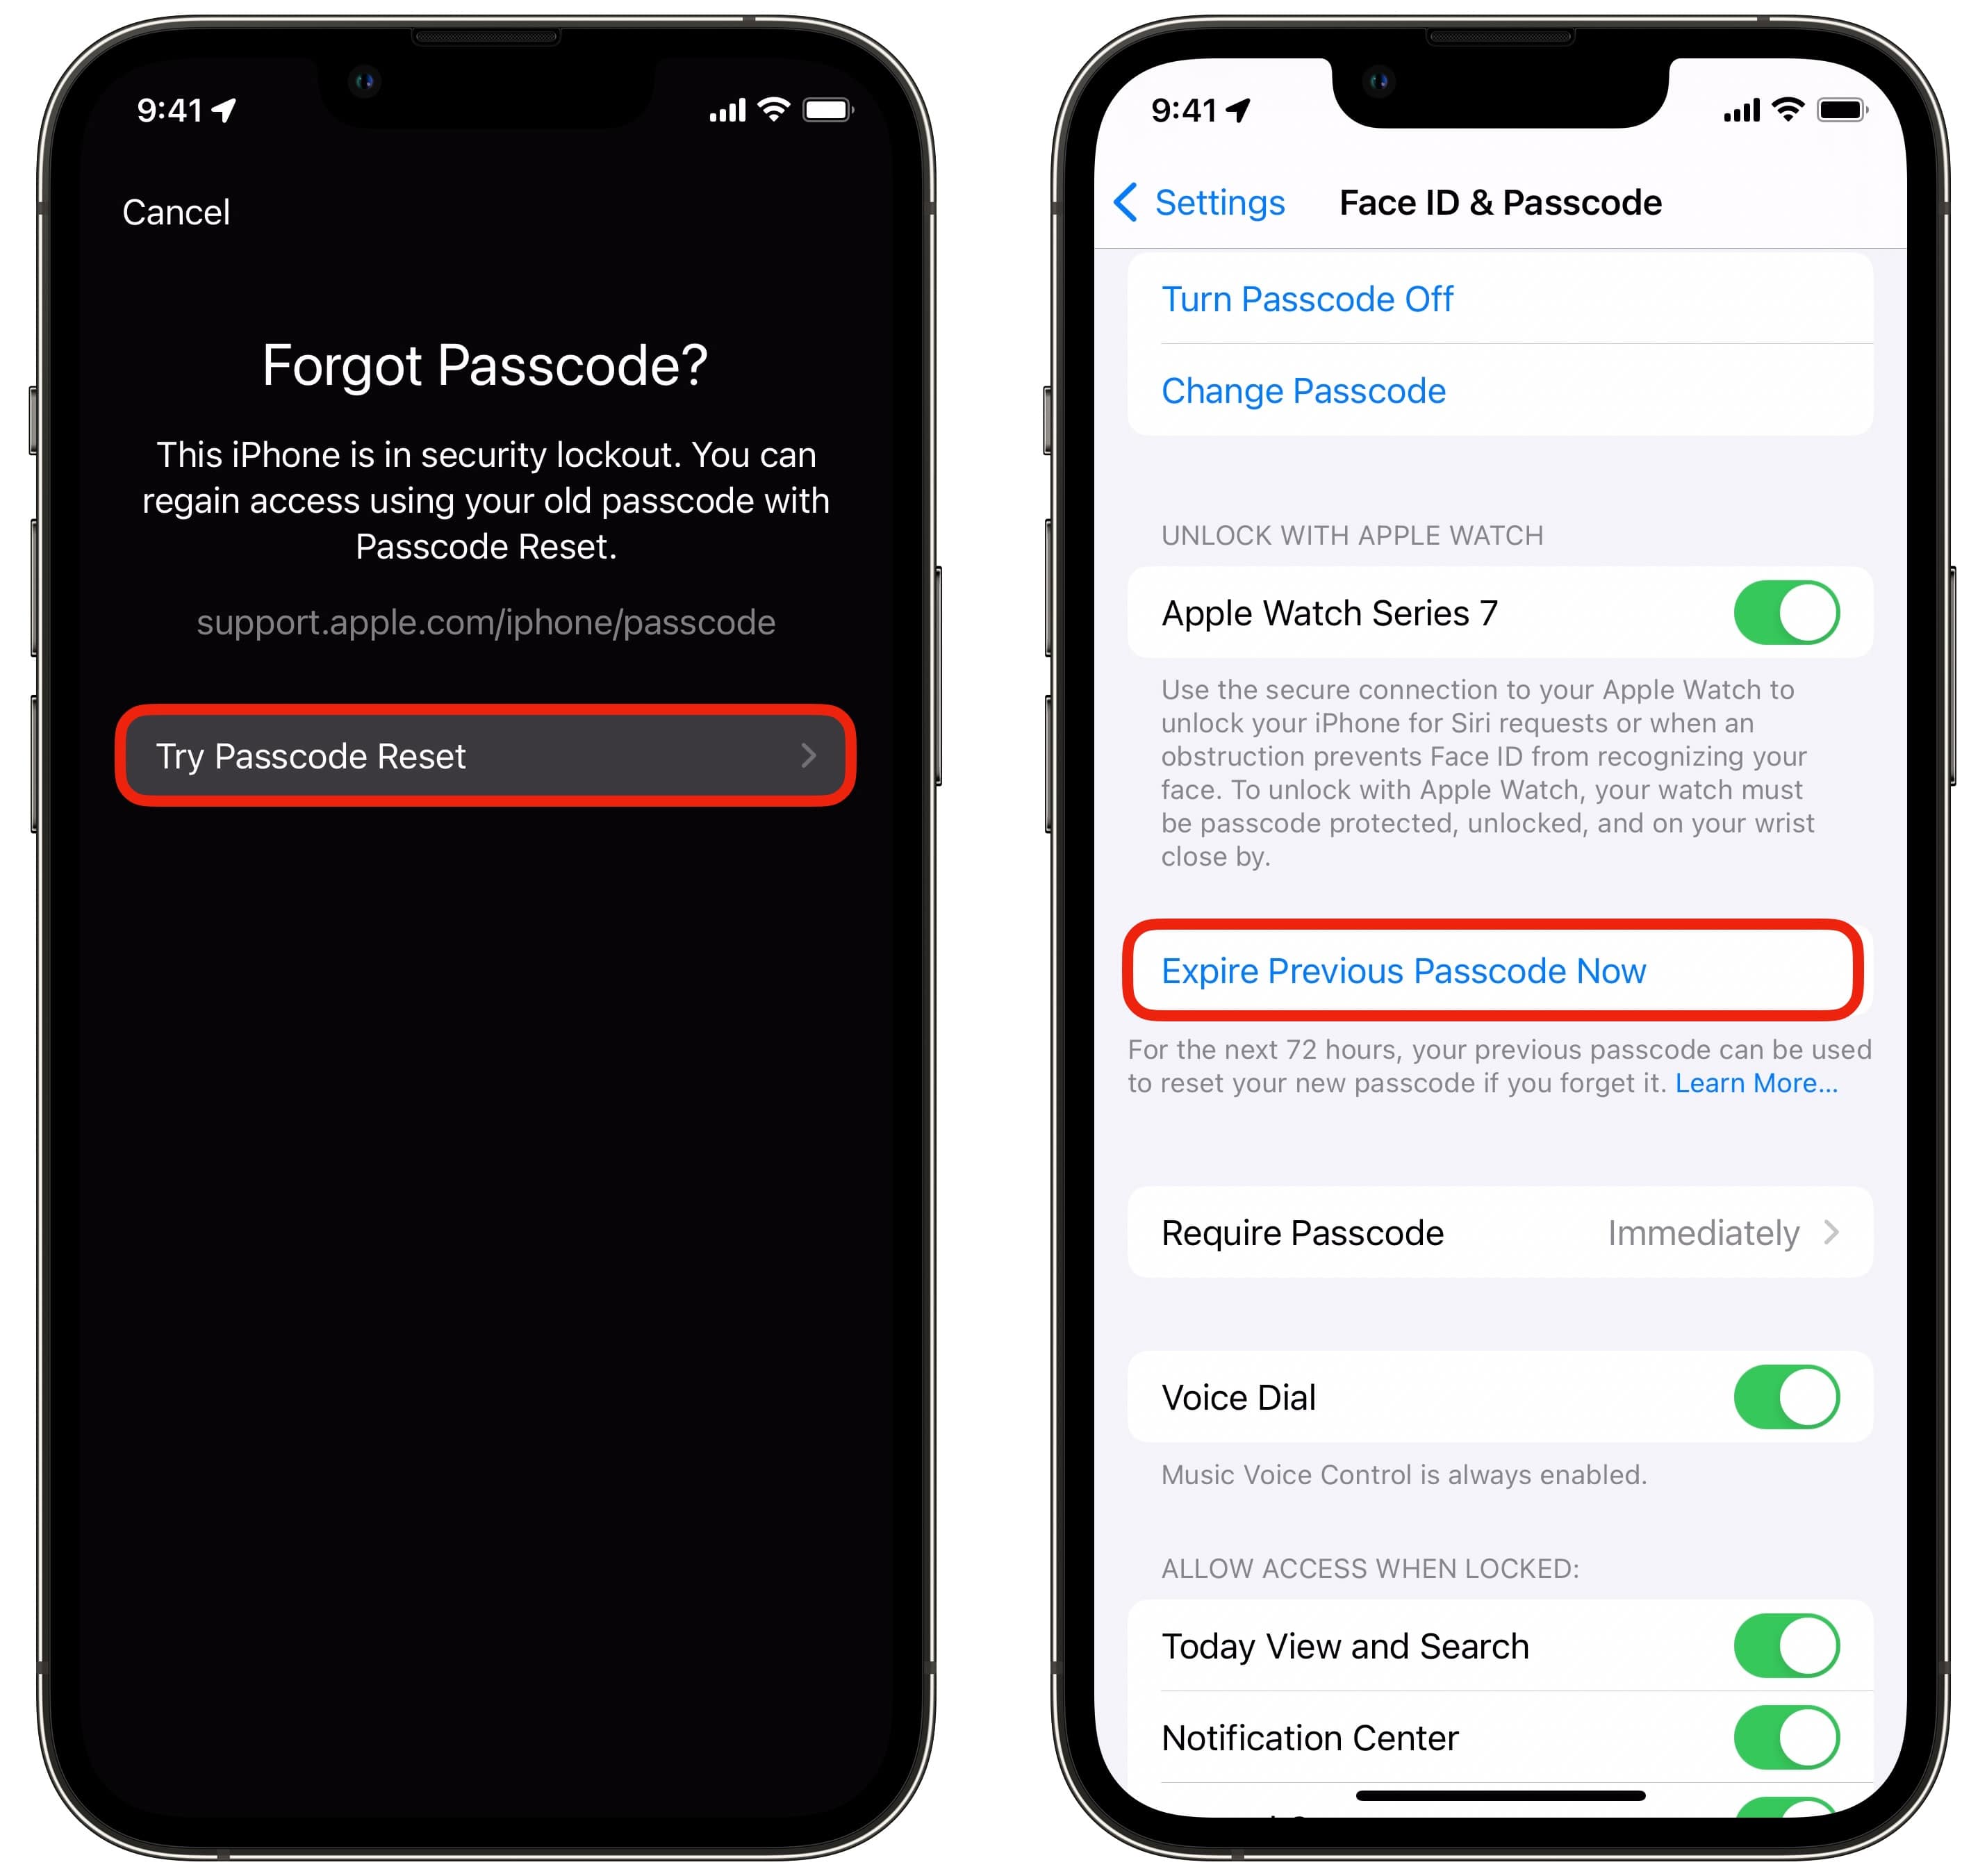 Try Password Reset and Expire Previous Passcode Now